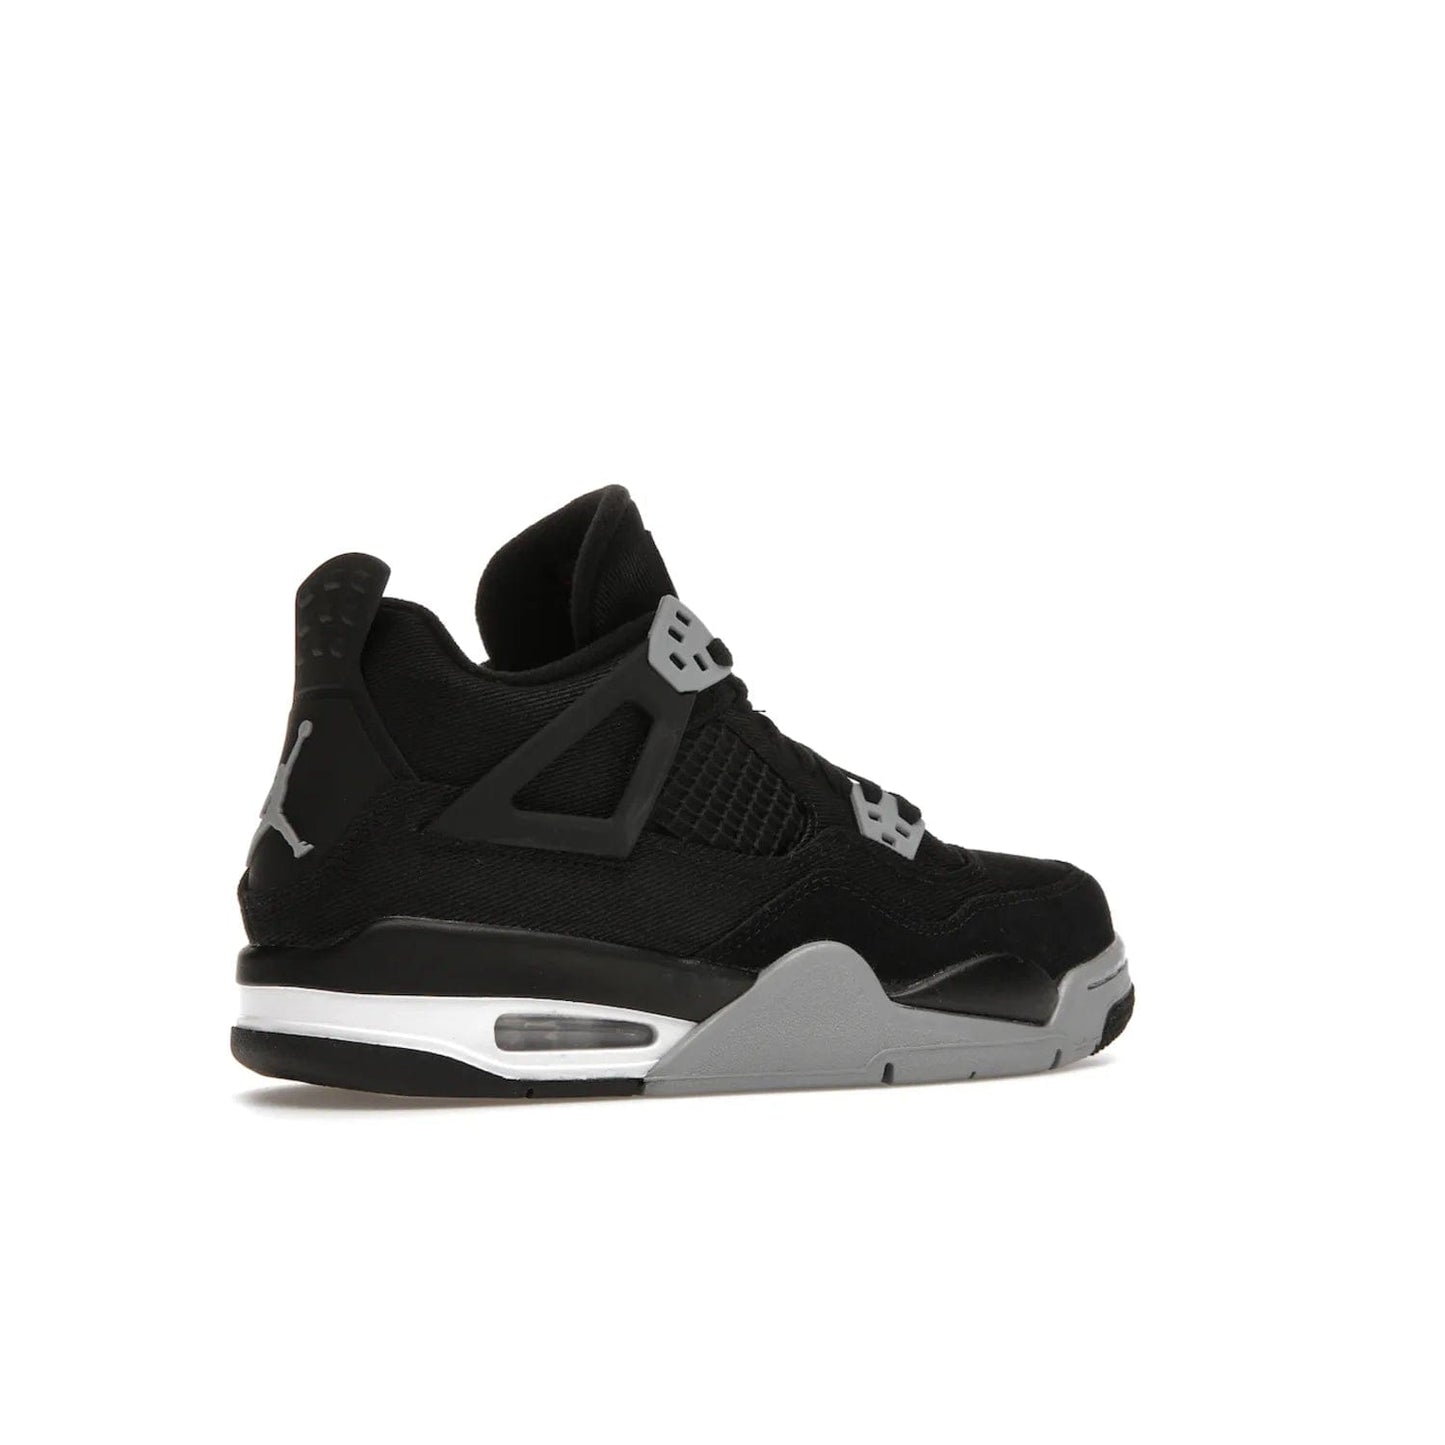 Jordan 4 Retro Black Canvas (GS) - Image 34 - Only at www.BallersClubKickz.com - Premium Air Jordan 4 Retro Black Canvas in grade-schooler's catalog. Featuring black suede canvas upper, grey molding, accents in red, white midsole, woven Jumpman tag, & visible AIR cushioning. Releasing Oct. 1, 2022.